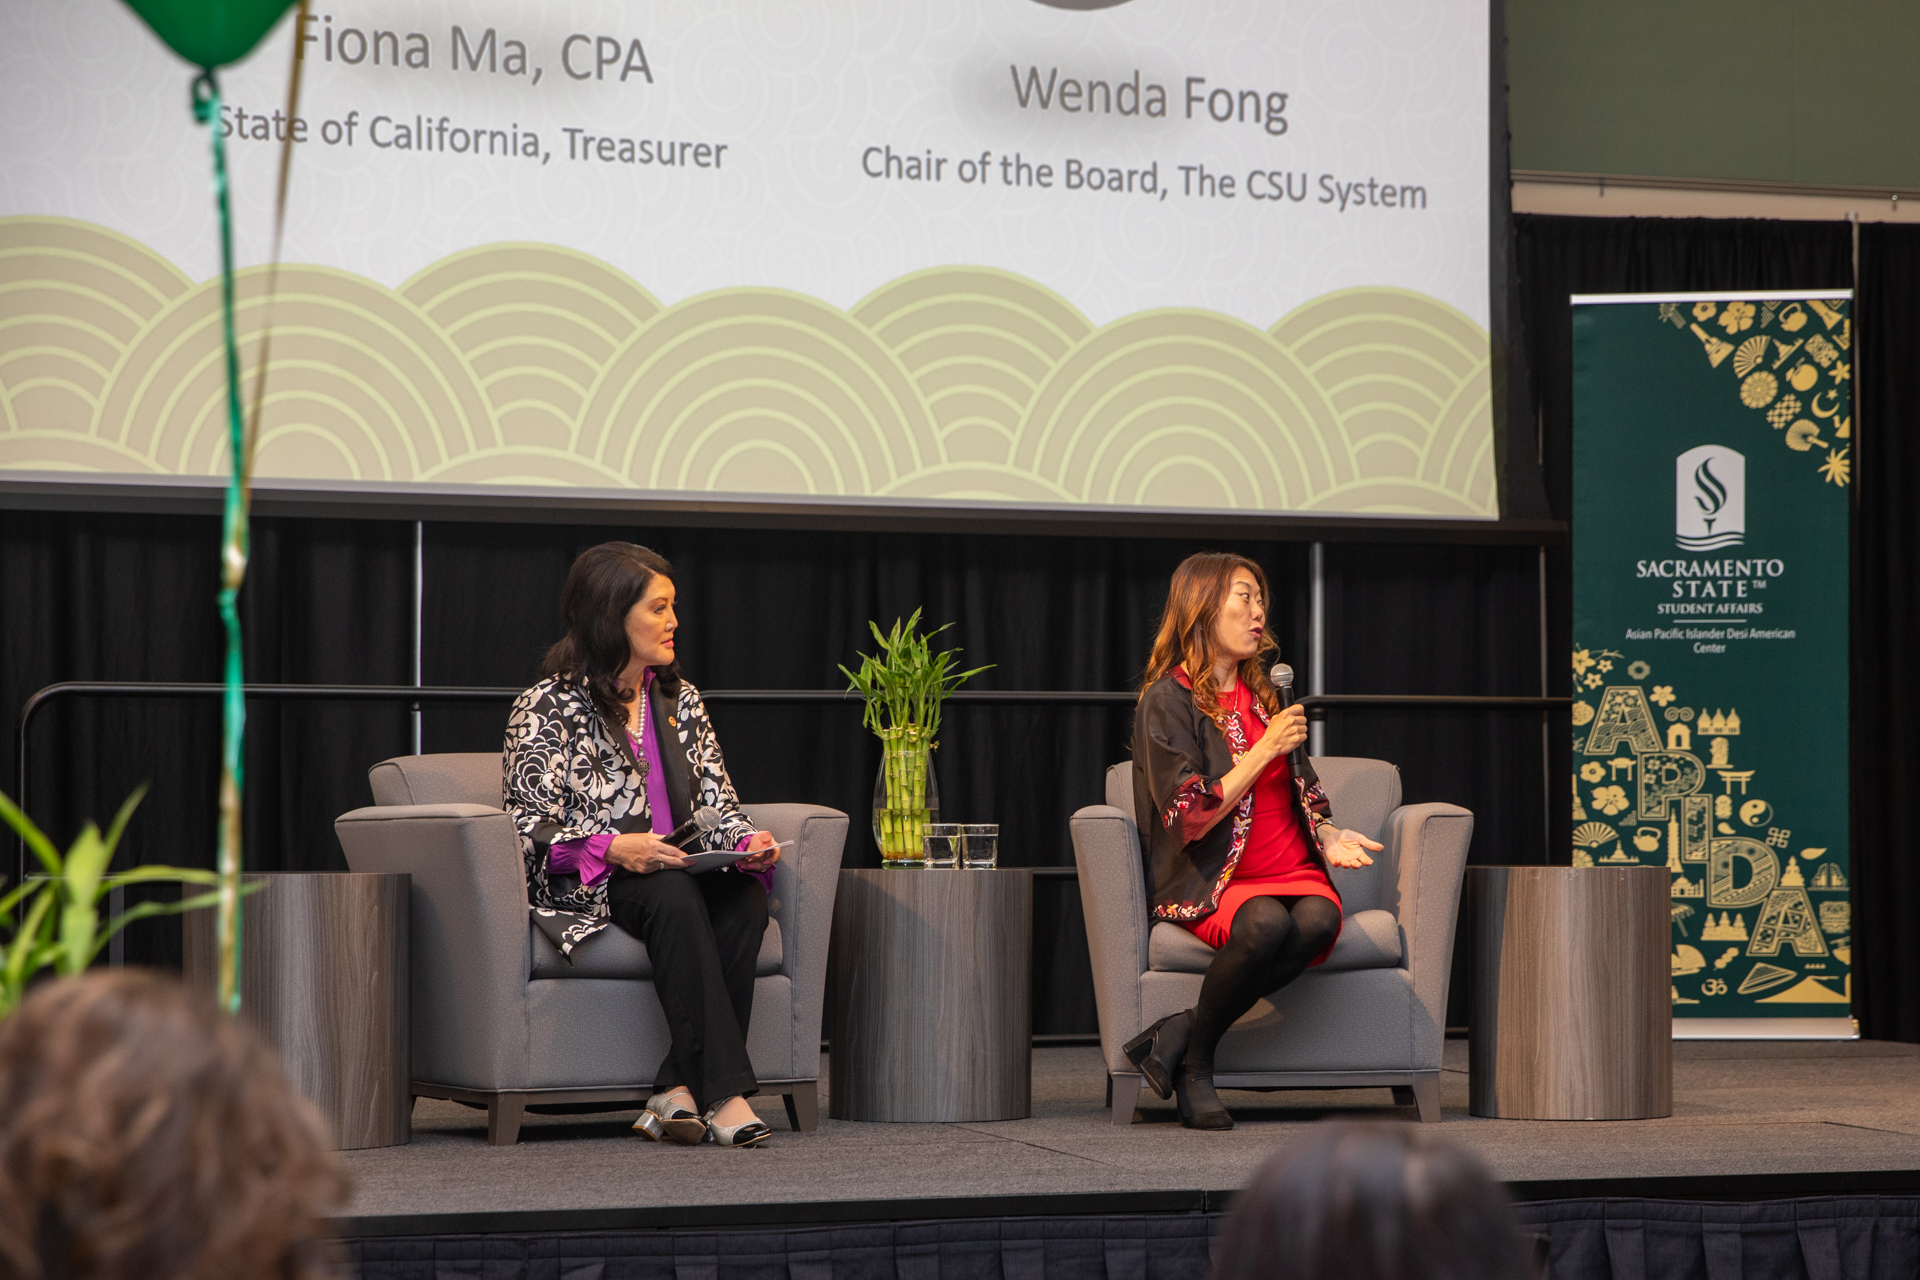 CSU Trustee Wenda Fong and State Treasurer Fiona Ma sitting on a stage, speaking to APIDA College Day attendees.